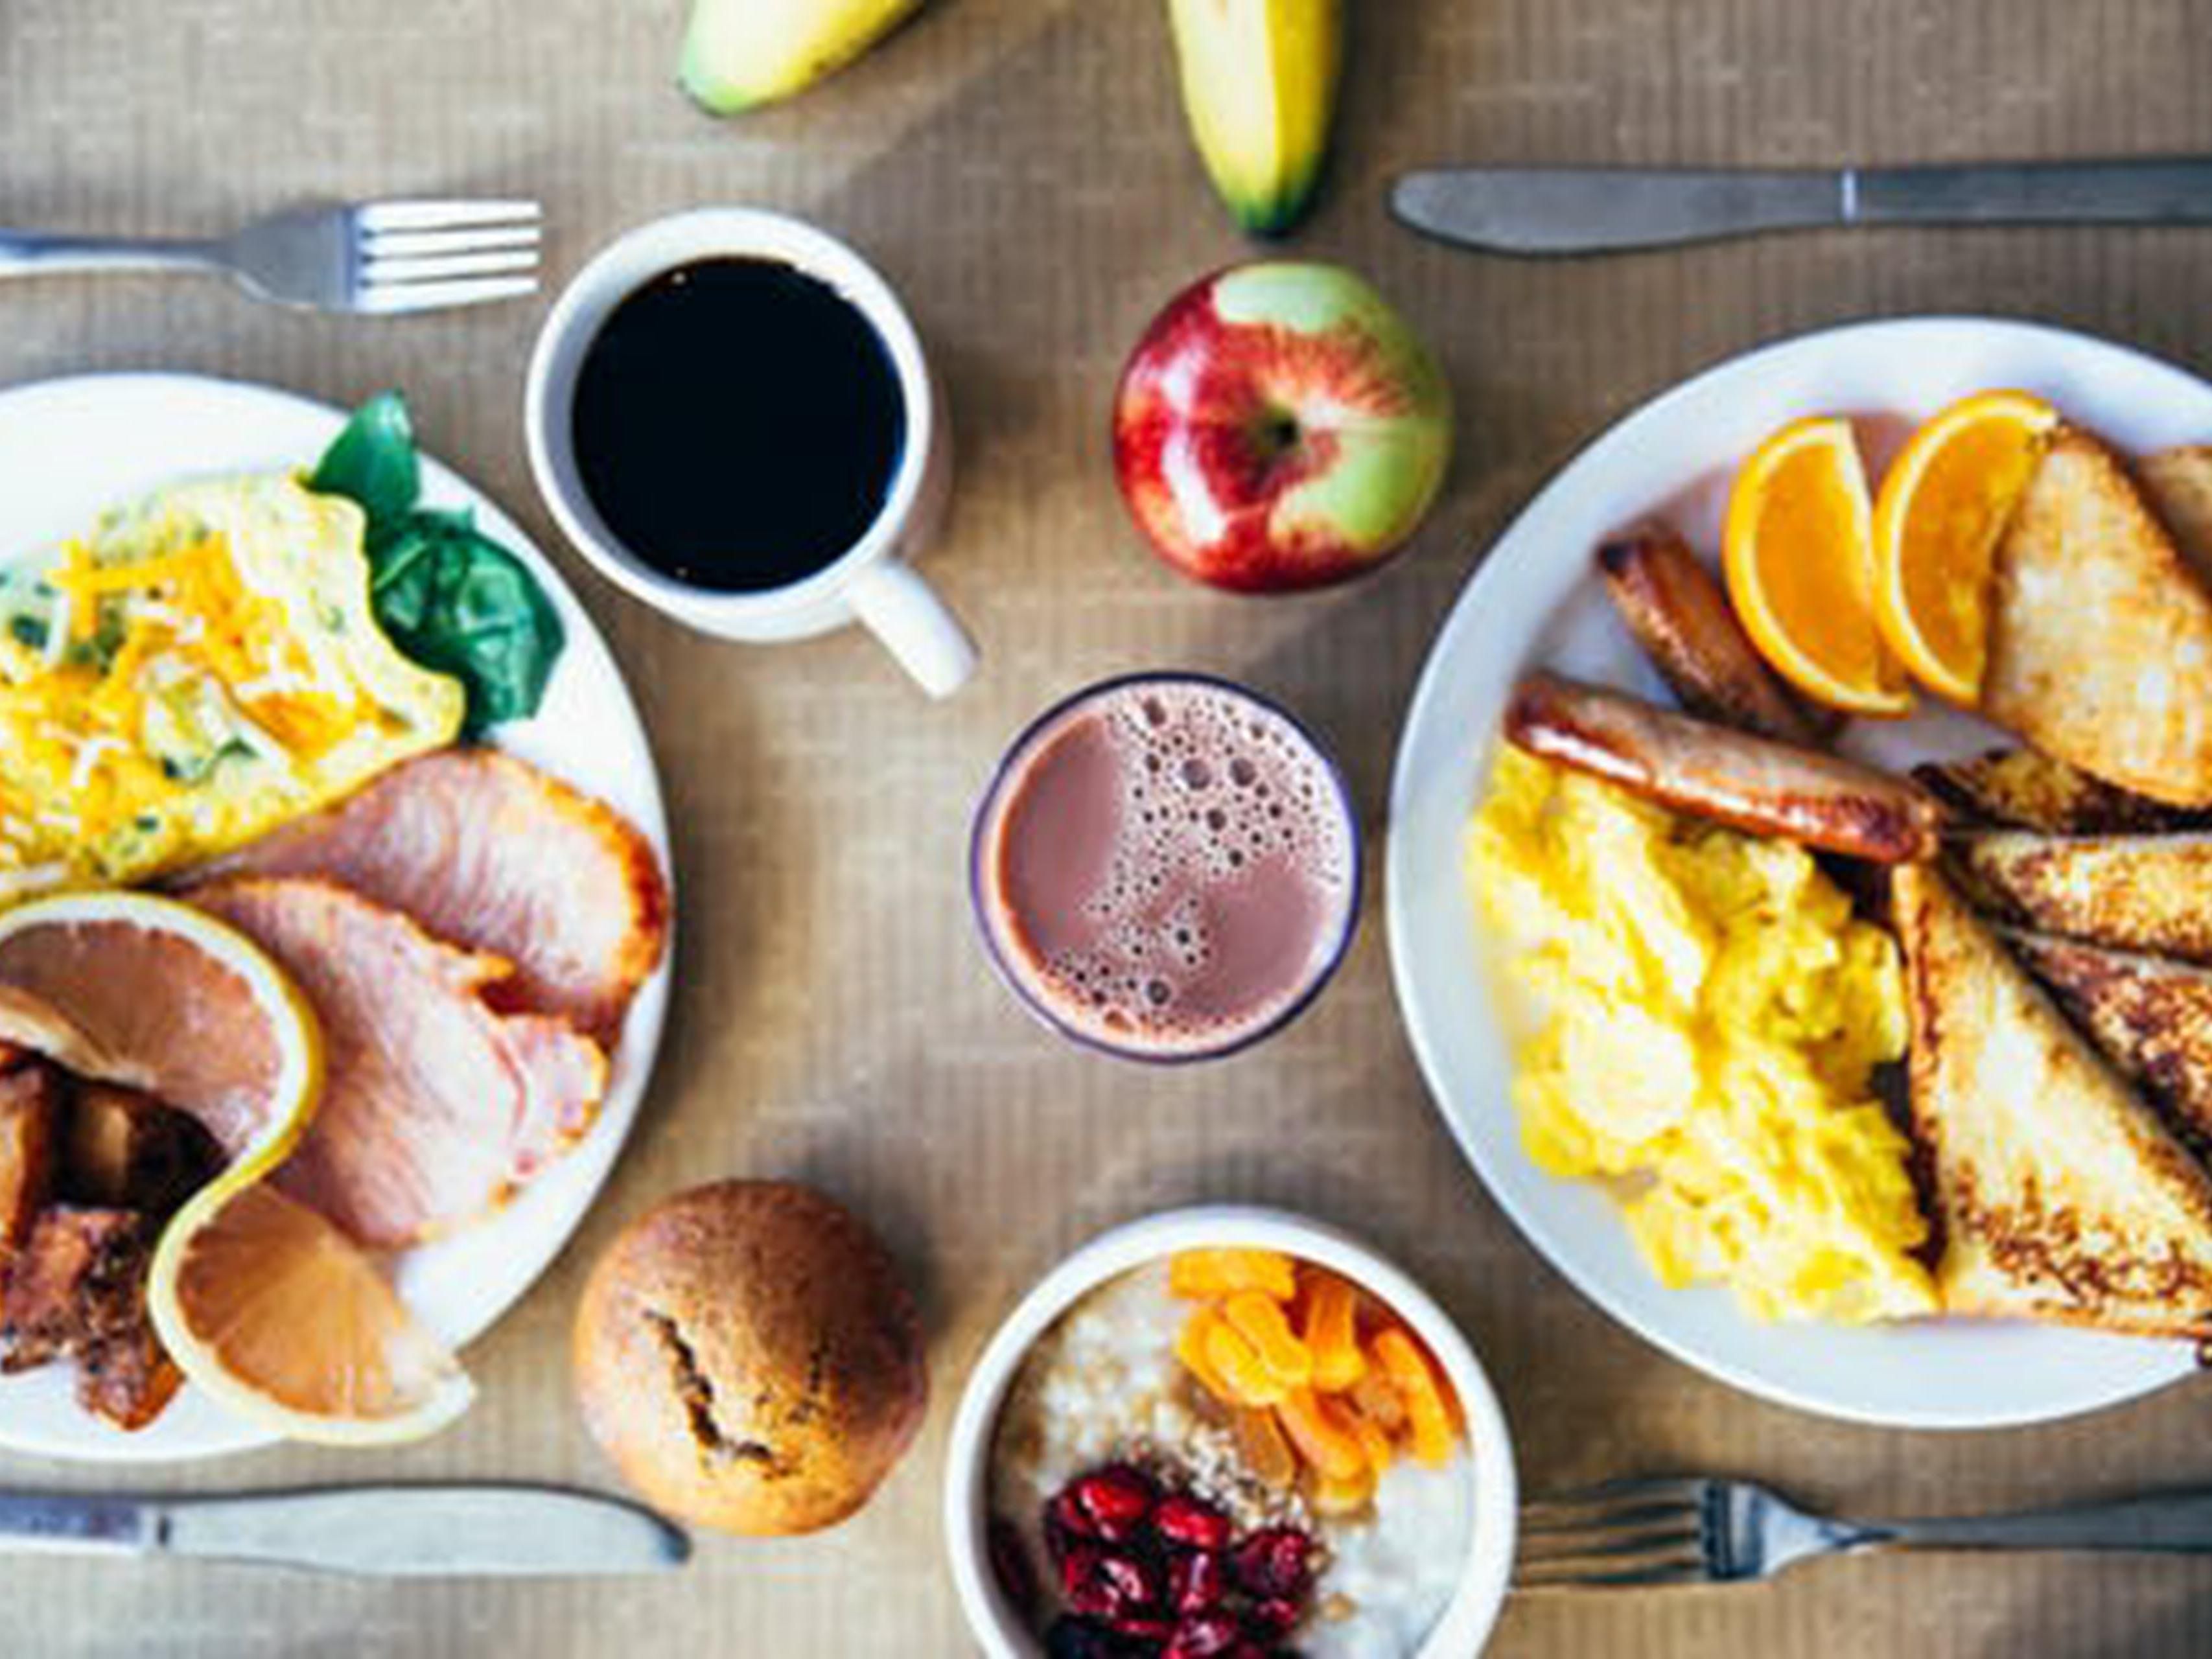 Blume Restaurant at Holiday Inn Detroit Northwest Livonia is now open every day of the week for breakfast, offering an assortment of hot and cold items.